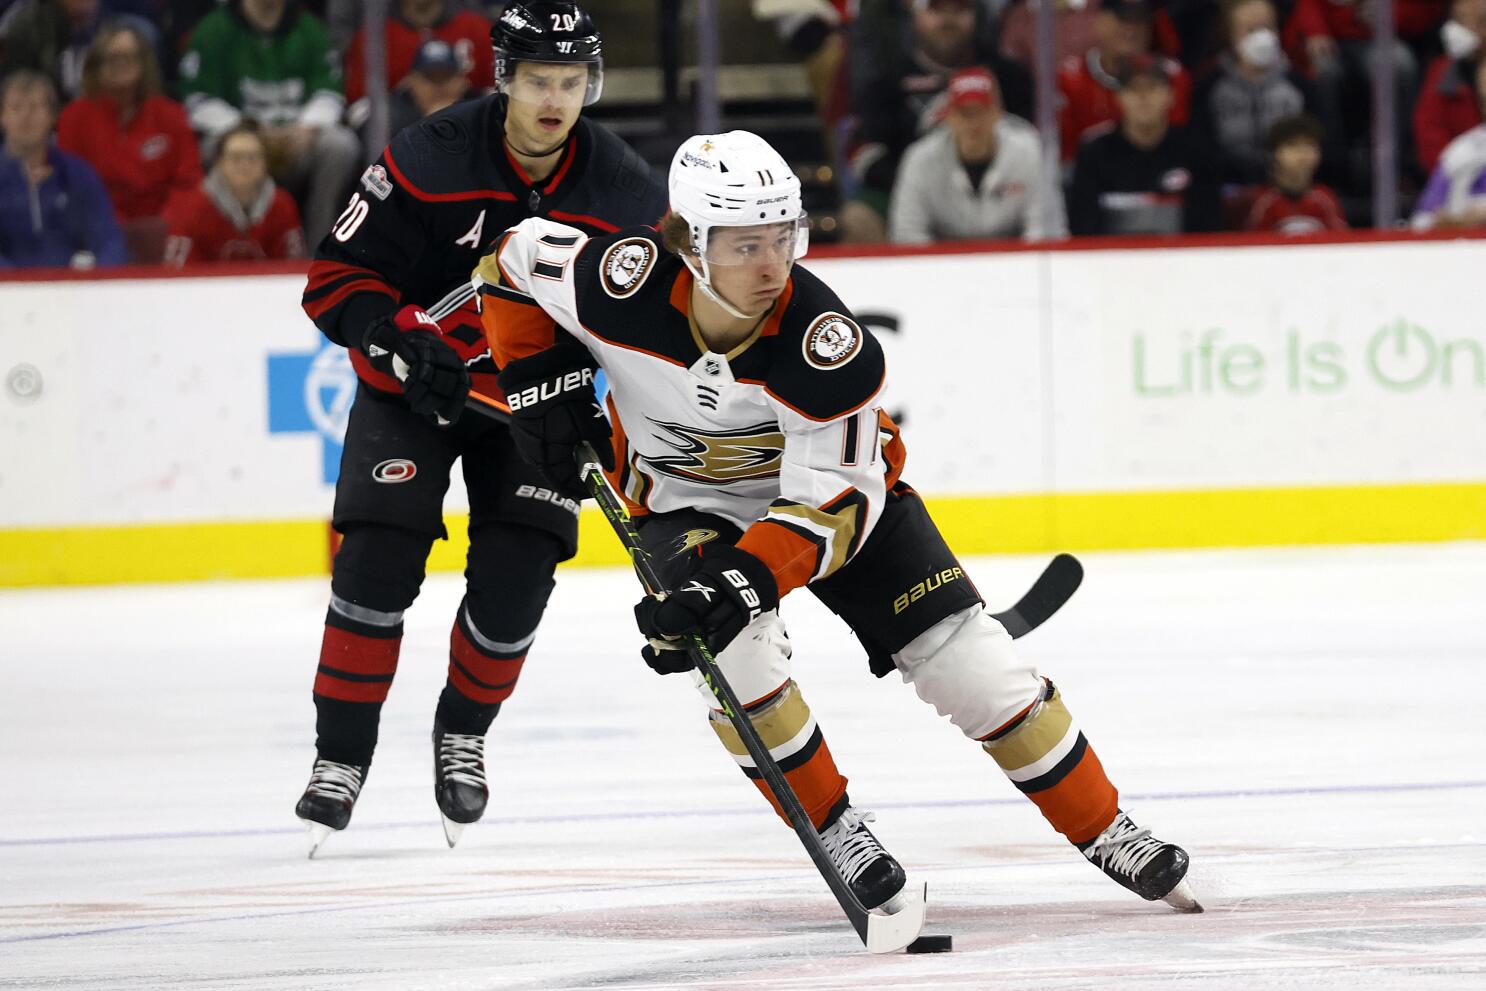 With a little help from Jobu, Calgary Flames end skid in Anaheim